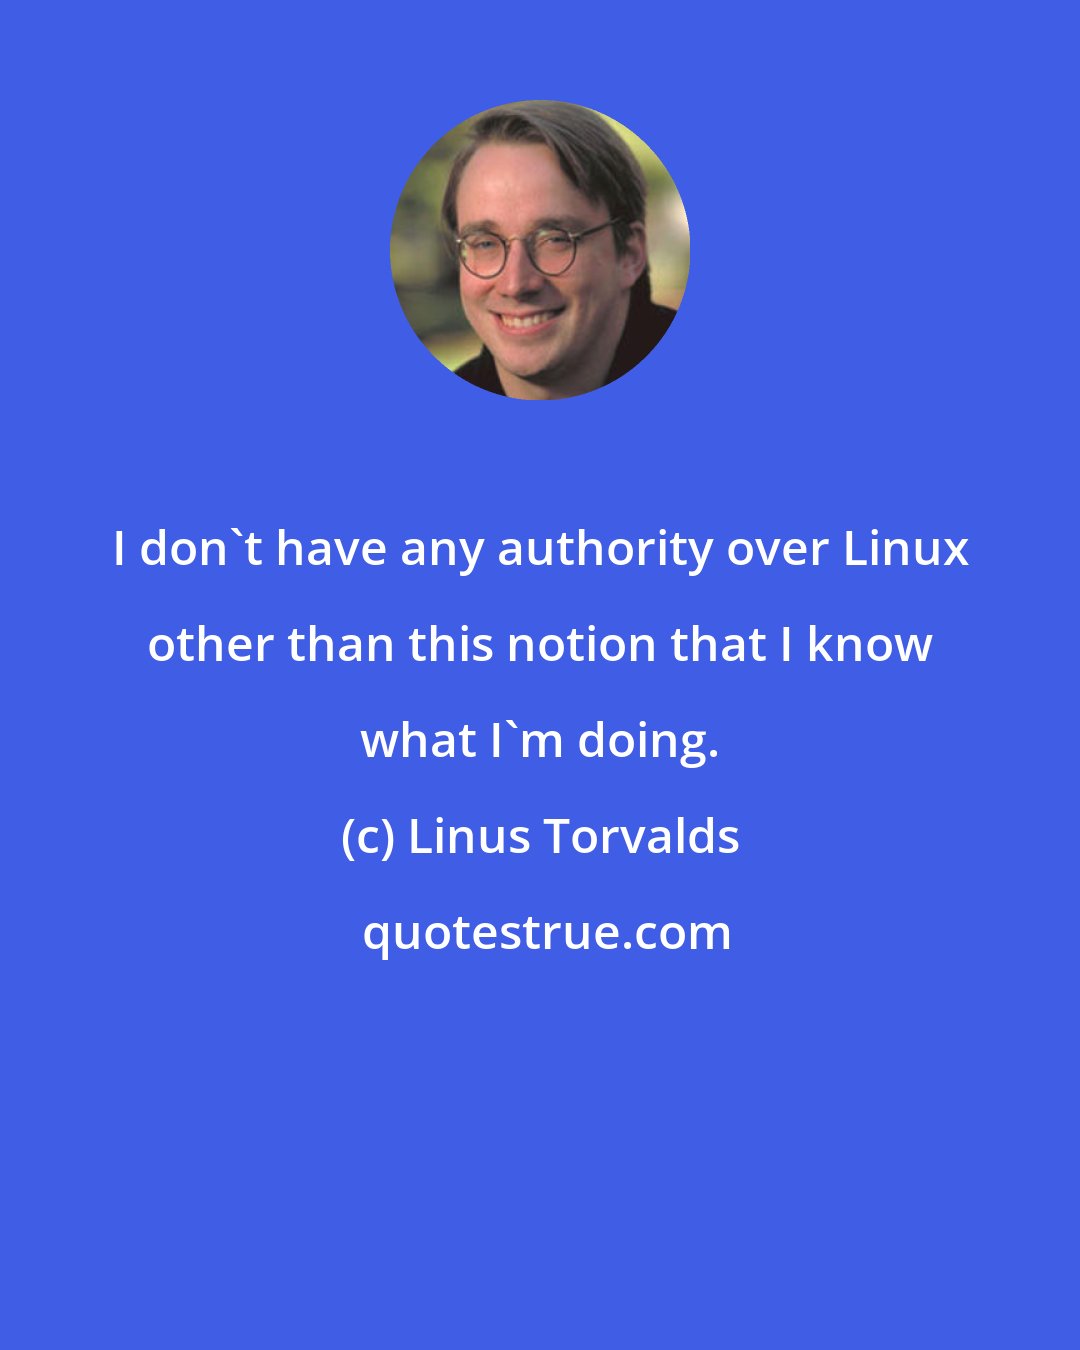 Linus Torvalds: I don't have any authority over Linux other than this notion that I know what I'm doing.